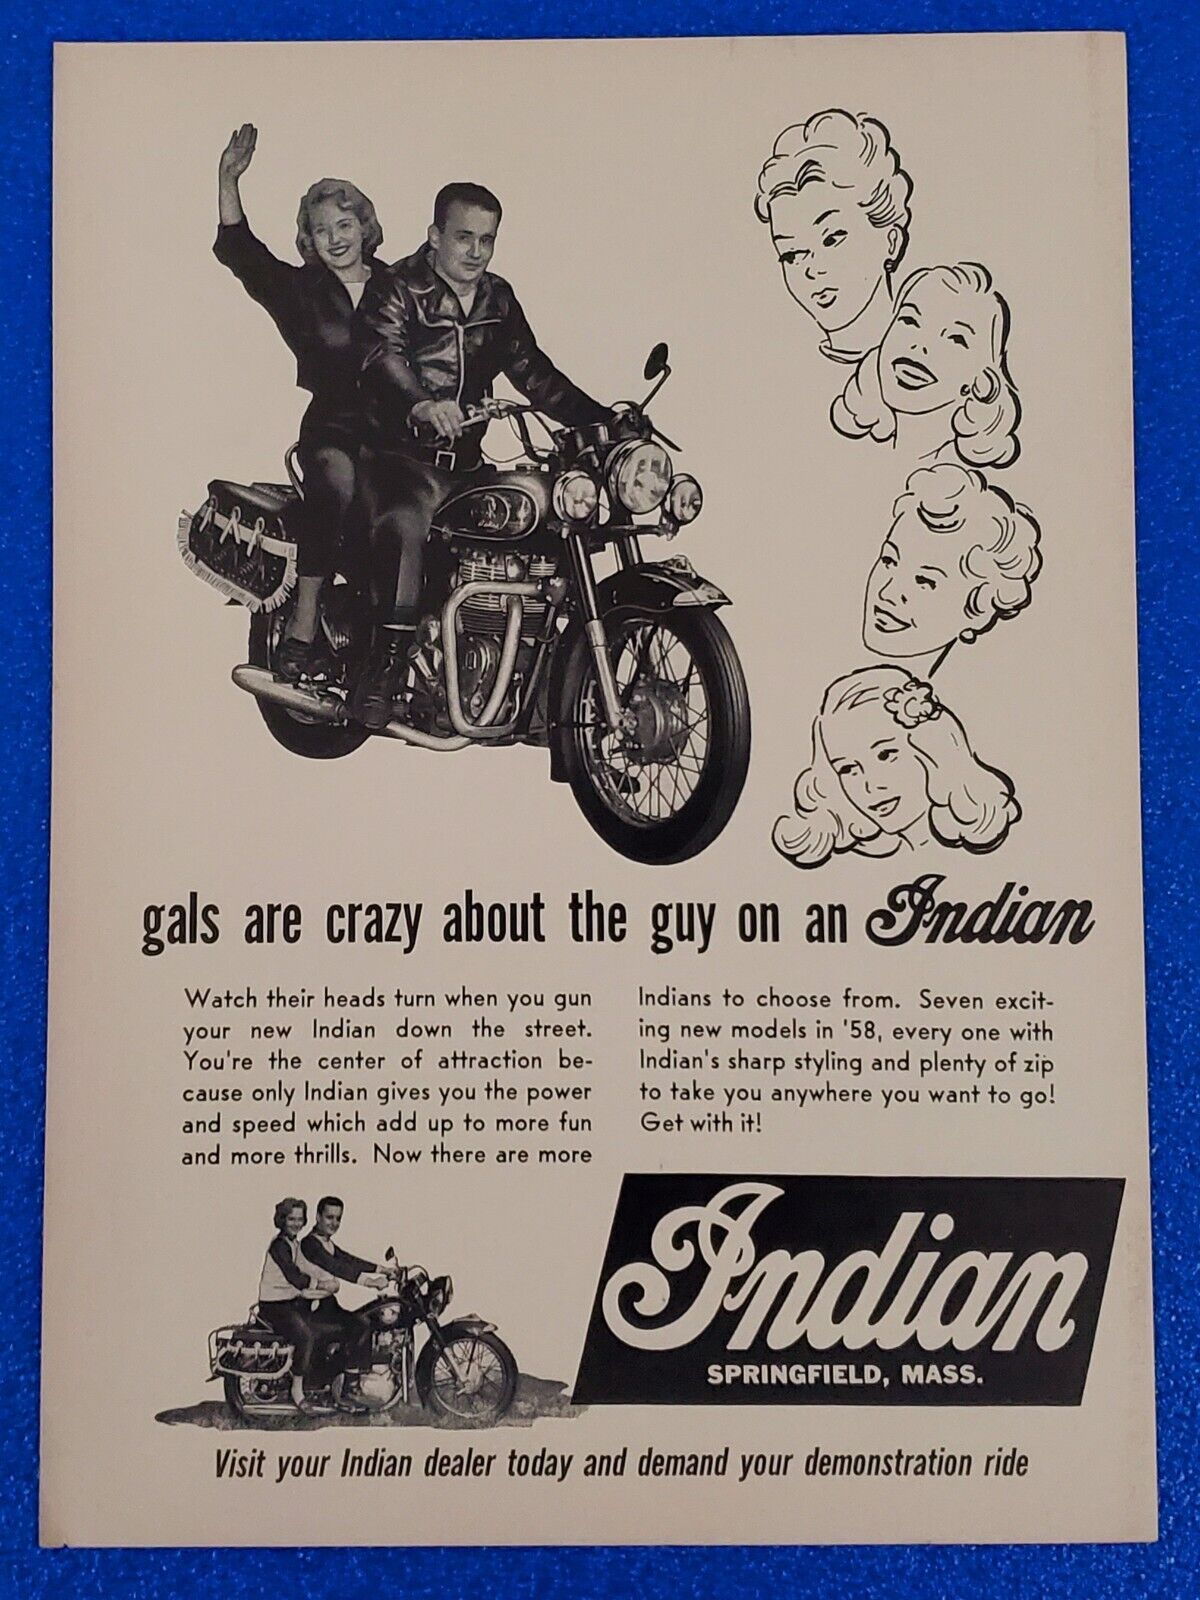 CLASSIC 1957 INDIAN MOTORCYCLE ORIGINAL PRINT AD VINTAGE AMERICAN CULTURAL ICON